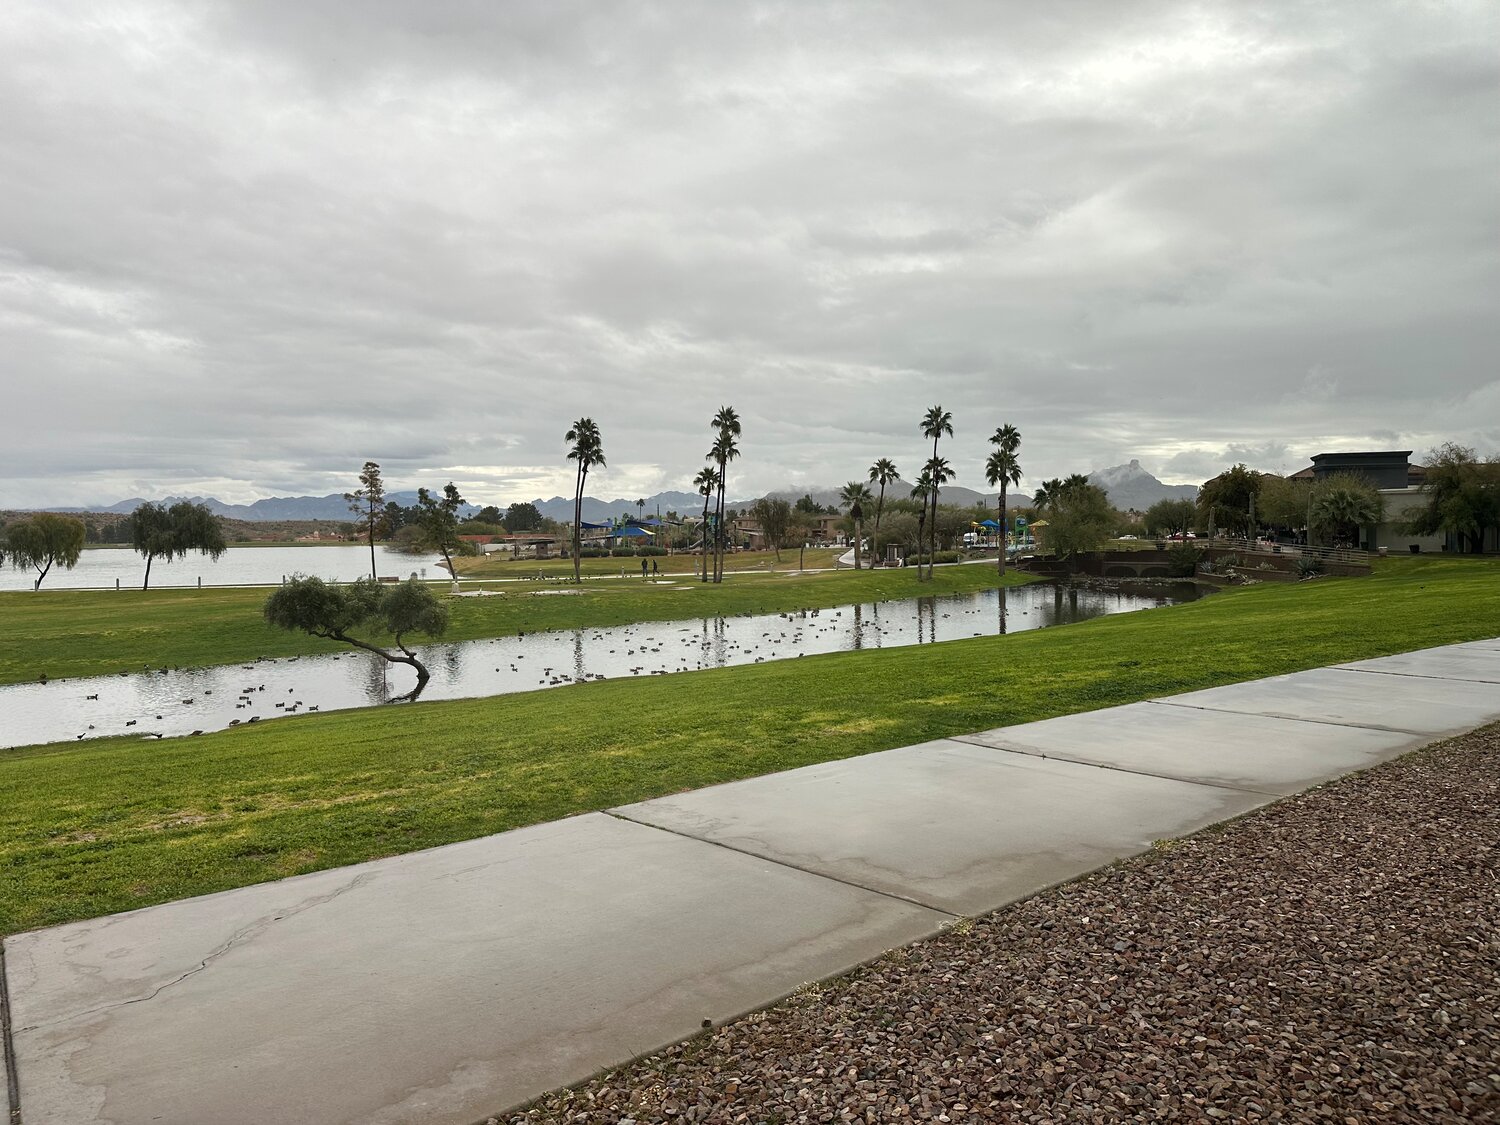 The recent rain in Fountain Hills has caused disruption for the upcoming car show.